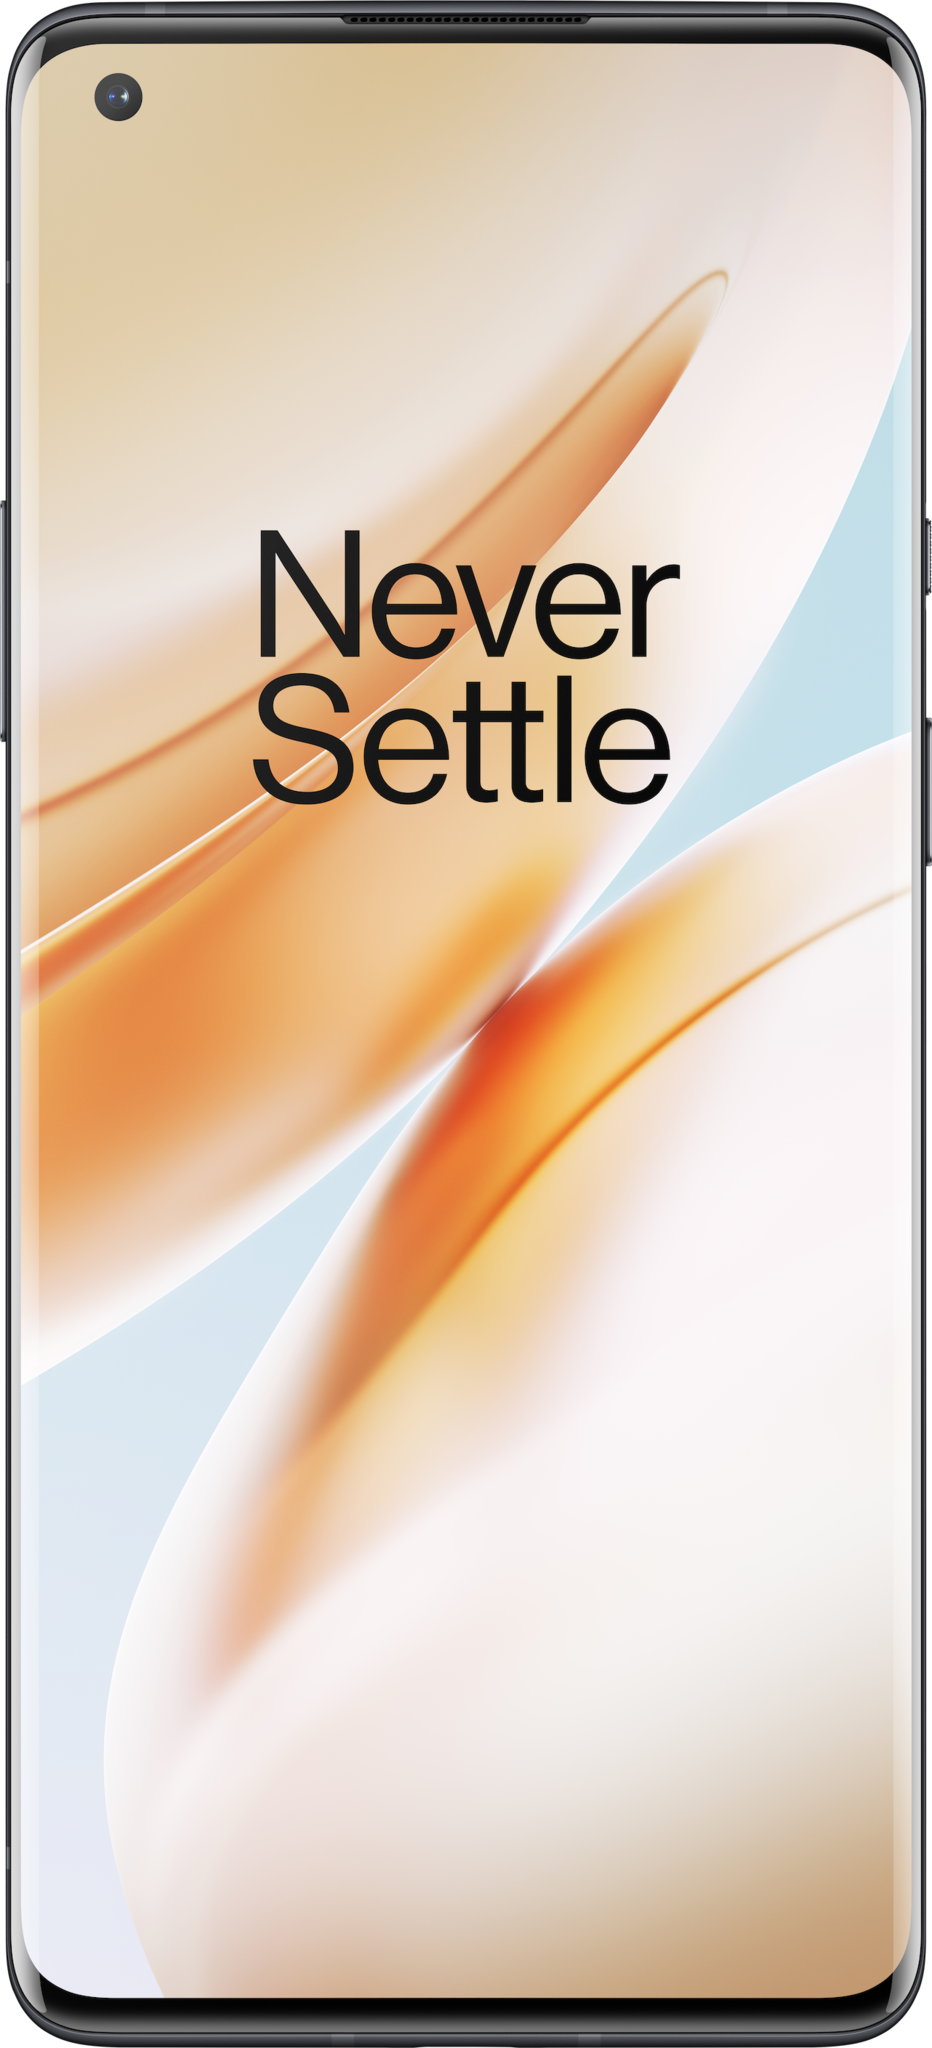 https://www.androidcentral.com/sites/androidcentral.com/files/styles/small/public/article_images/2020/04/oneplus-8-pro-black-front-render.png?itok=CfWtjDTY